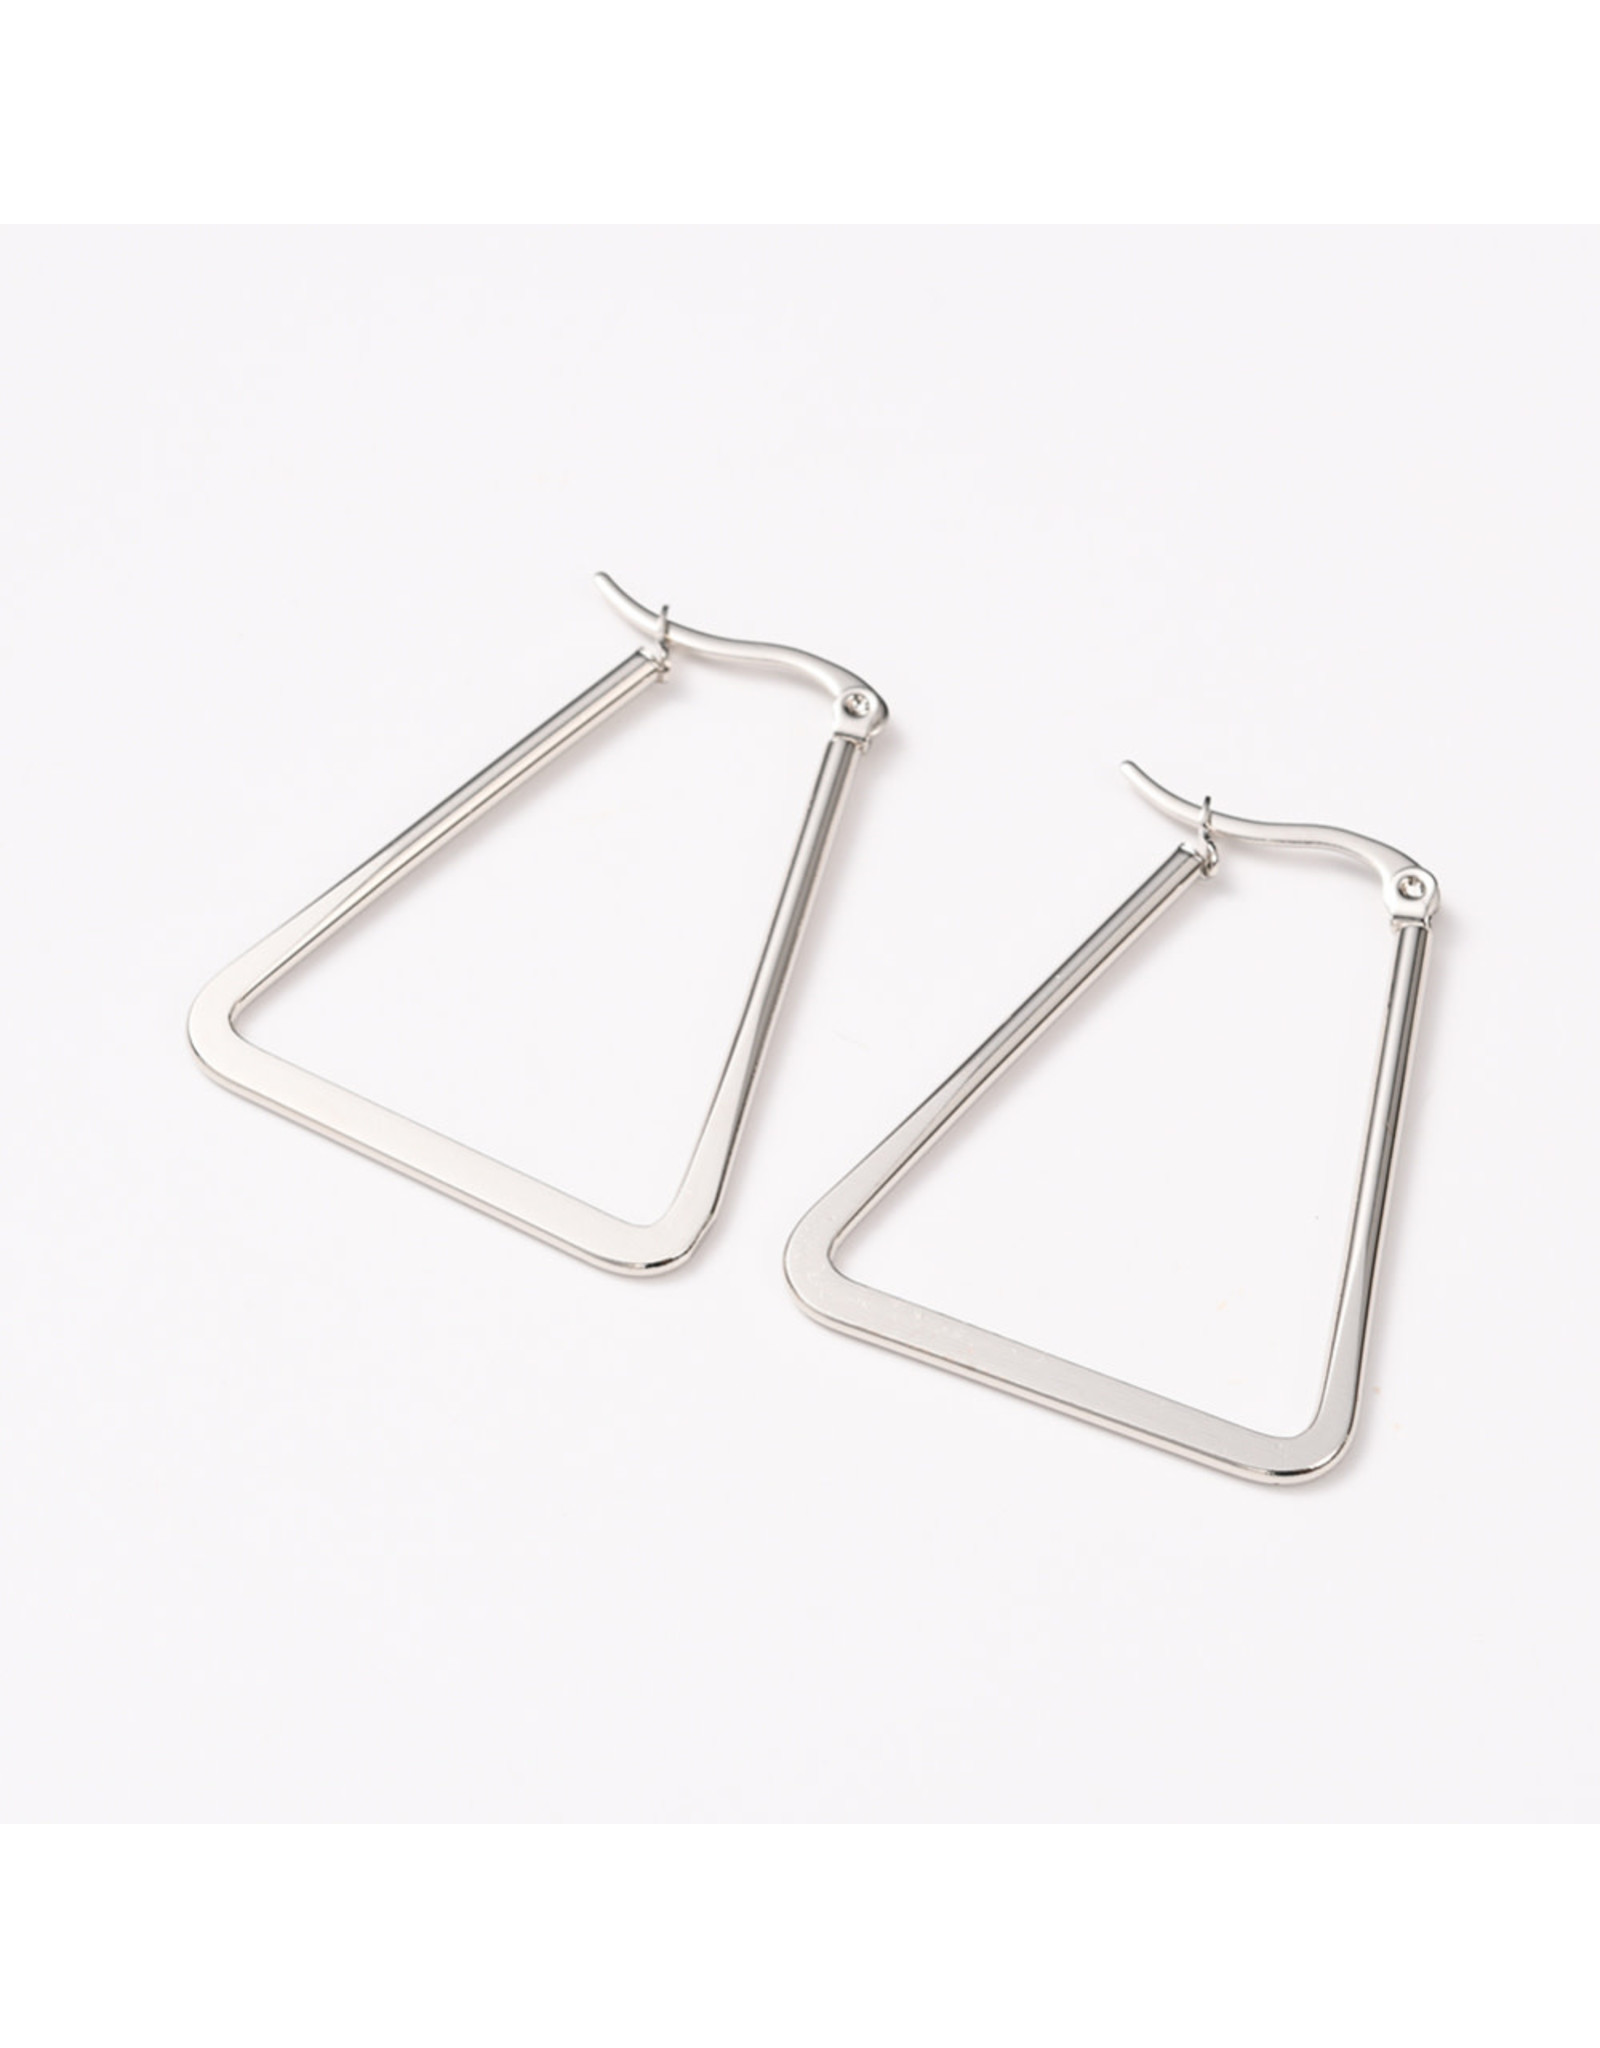 Triangle Earrings and Pendant  38x29mm Stainless Steel    x1 Set